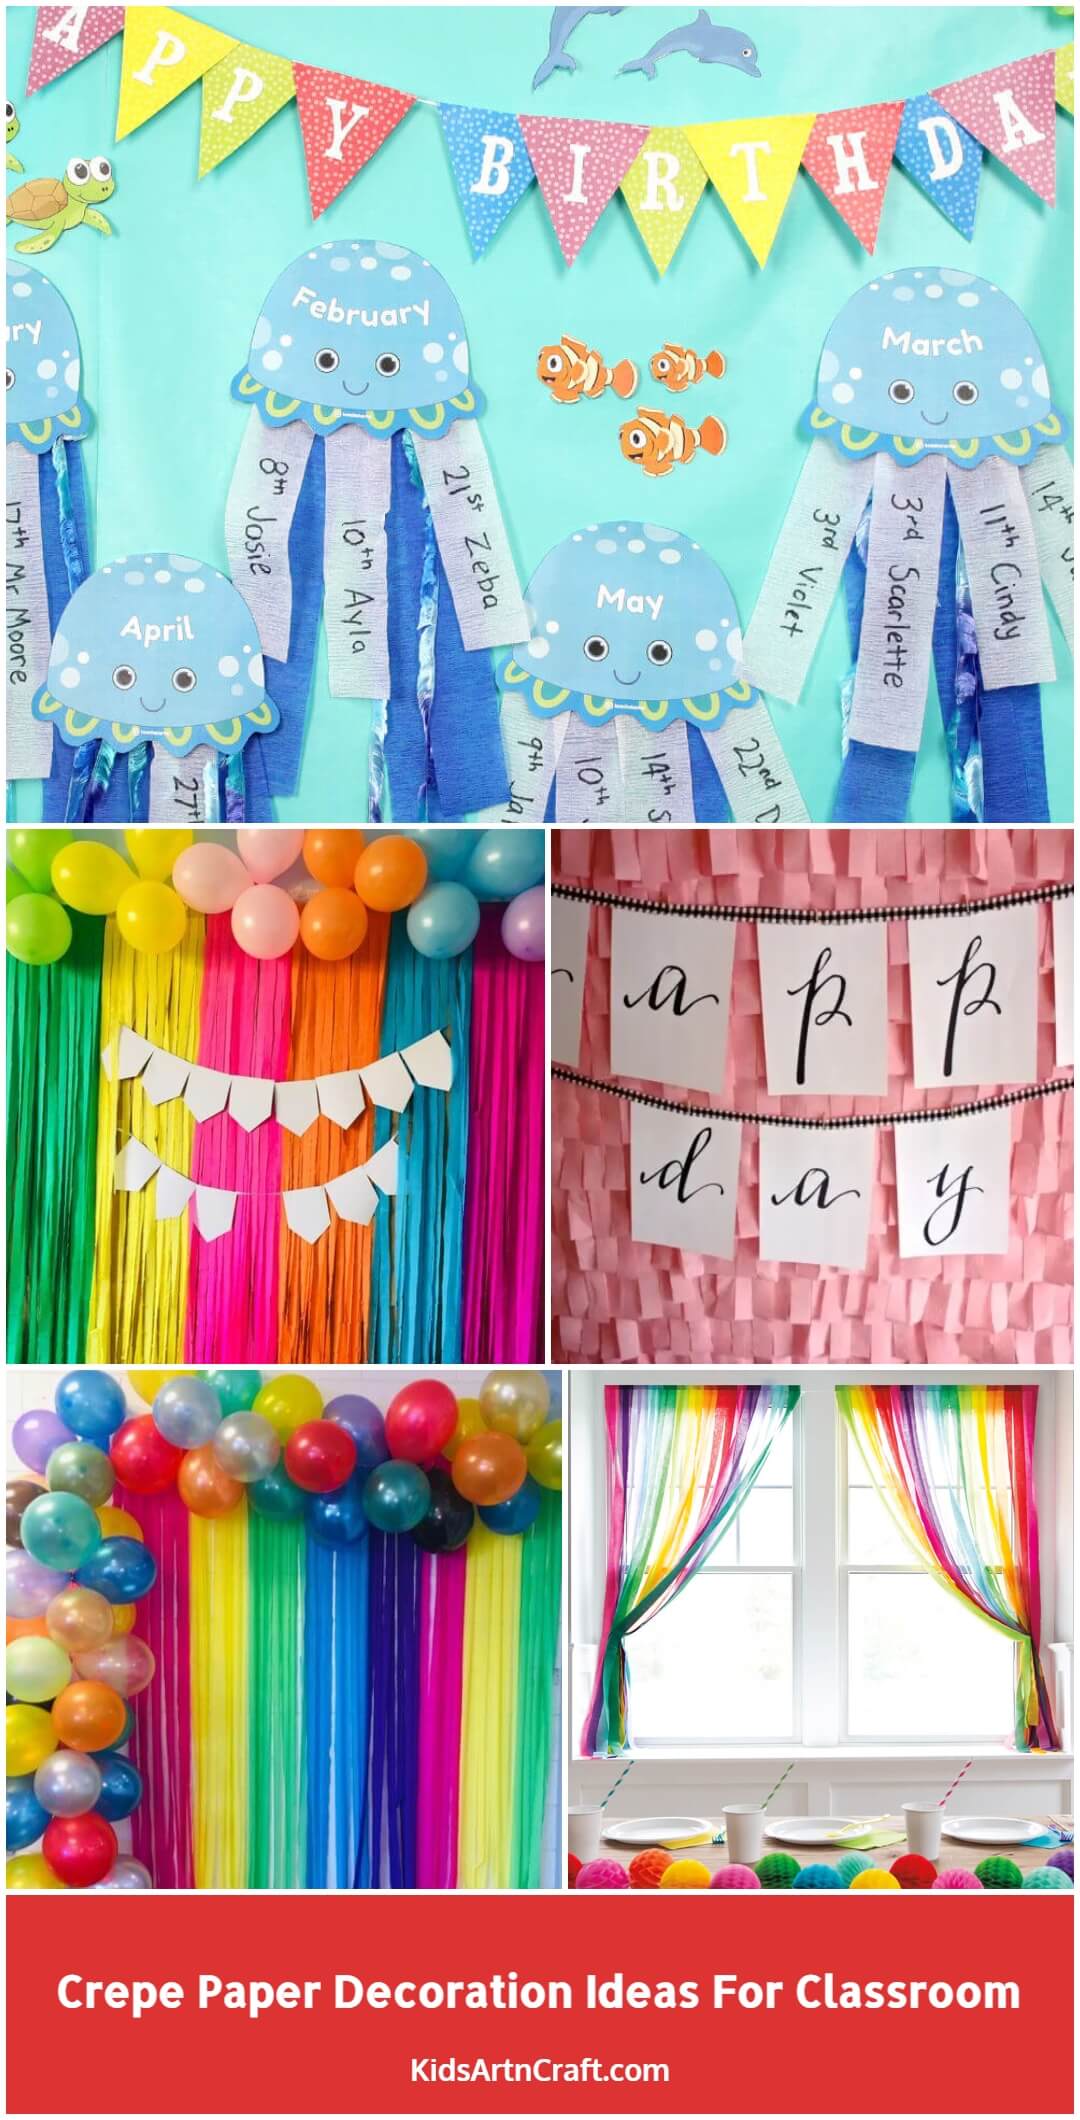 Crepe Paper Decoration Ideas for Classroom